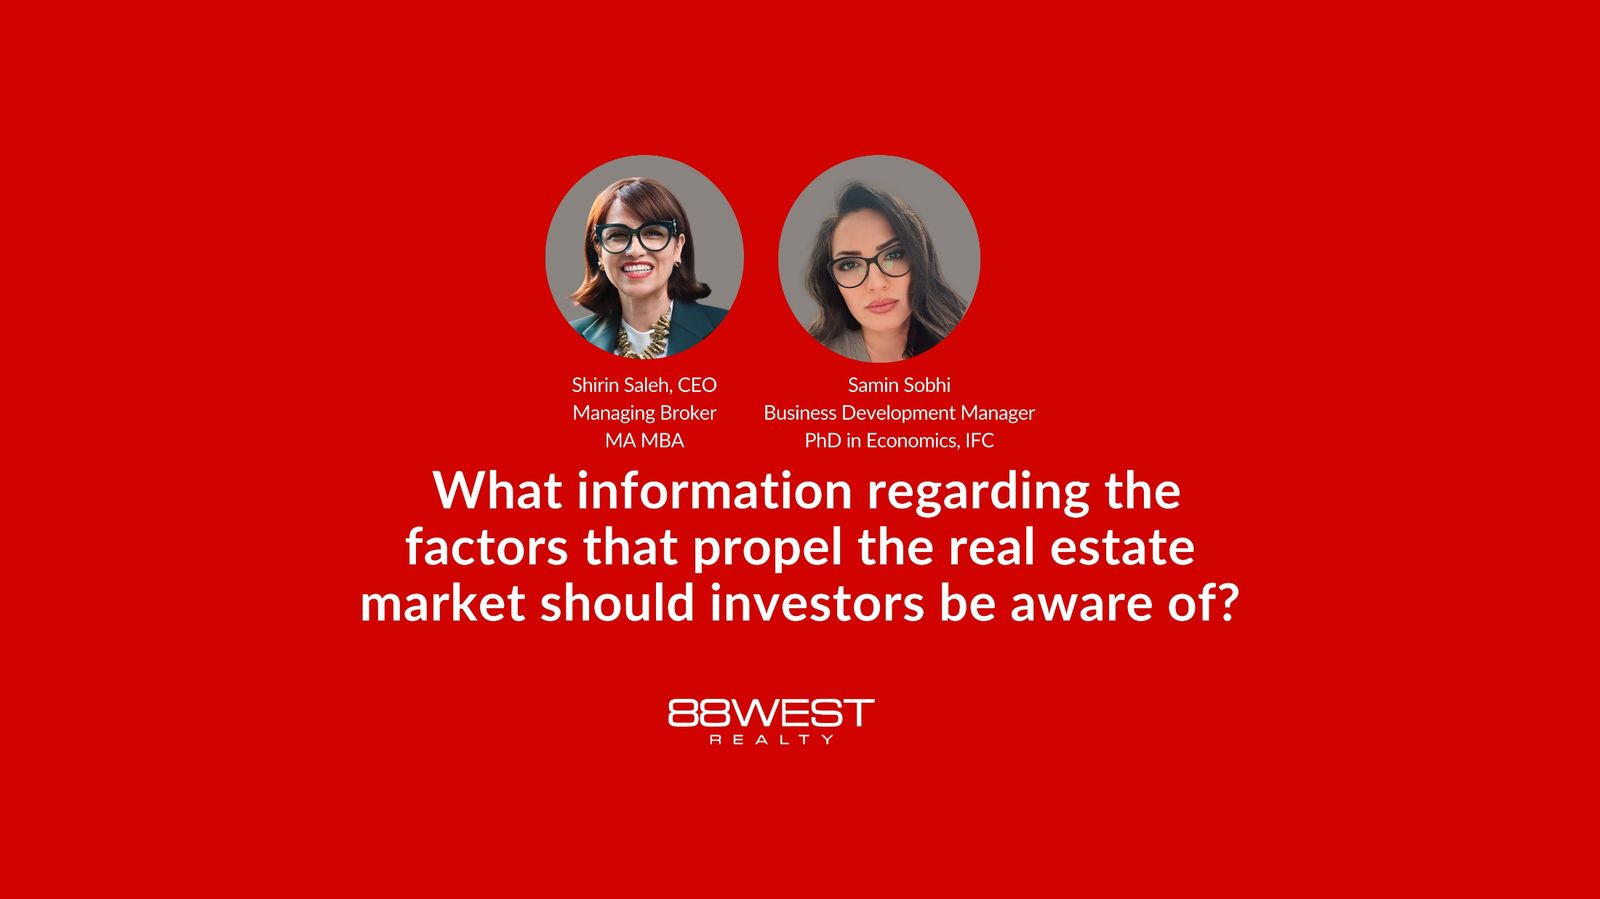 What information regarding the factors that propel the real estate market should investors be aware of?